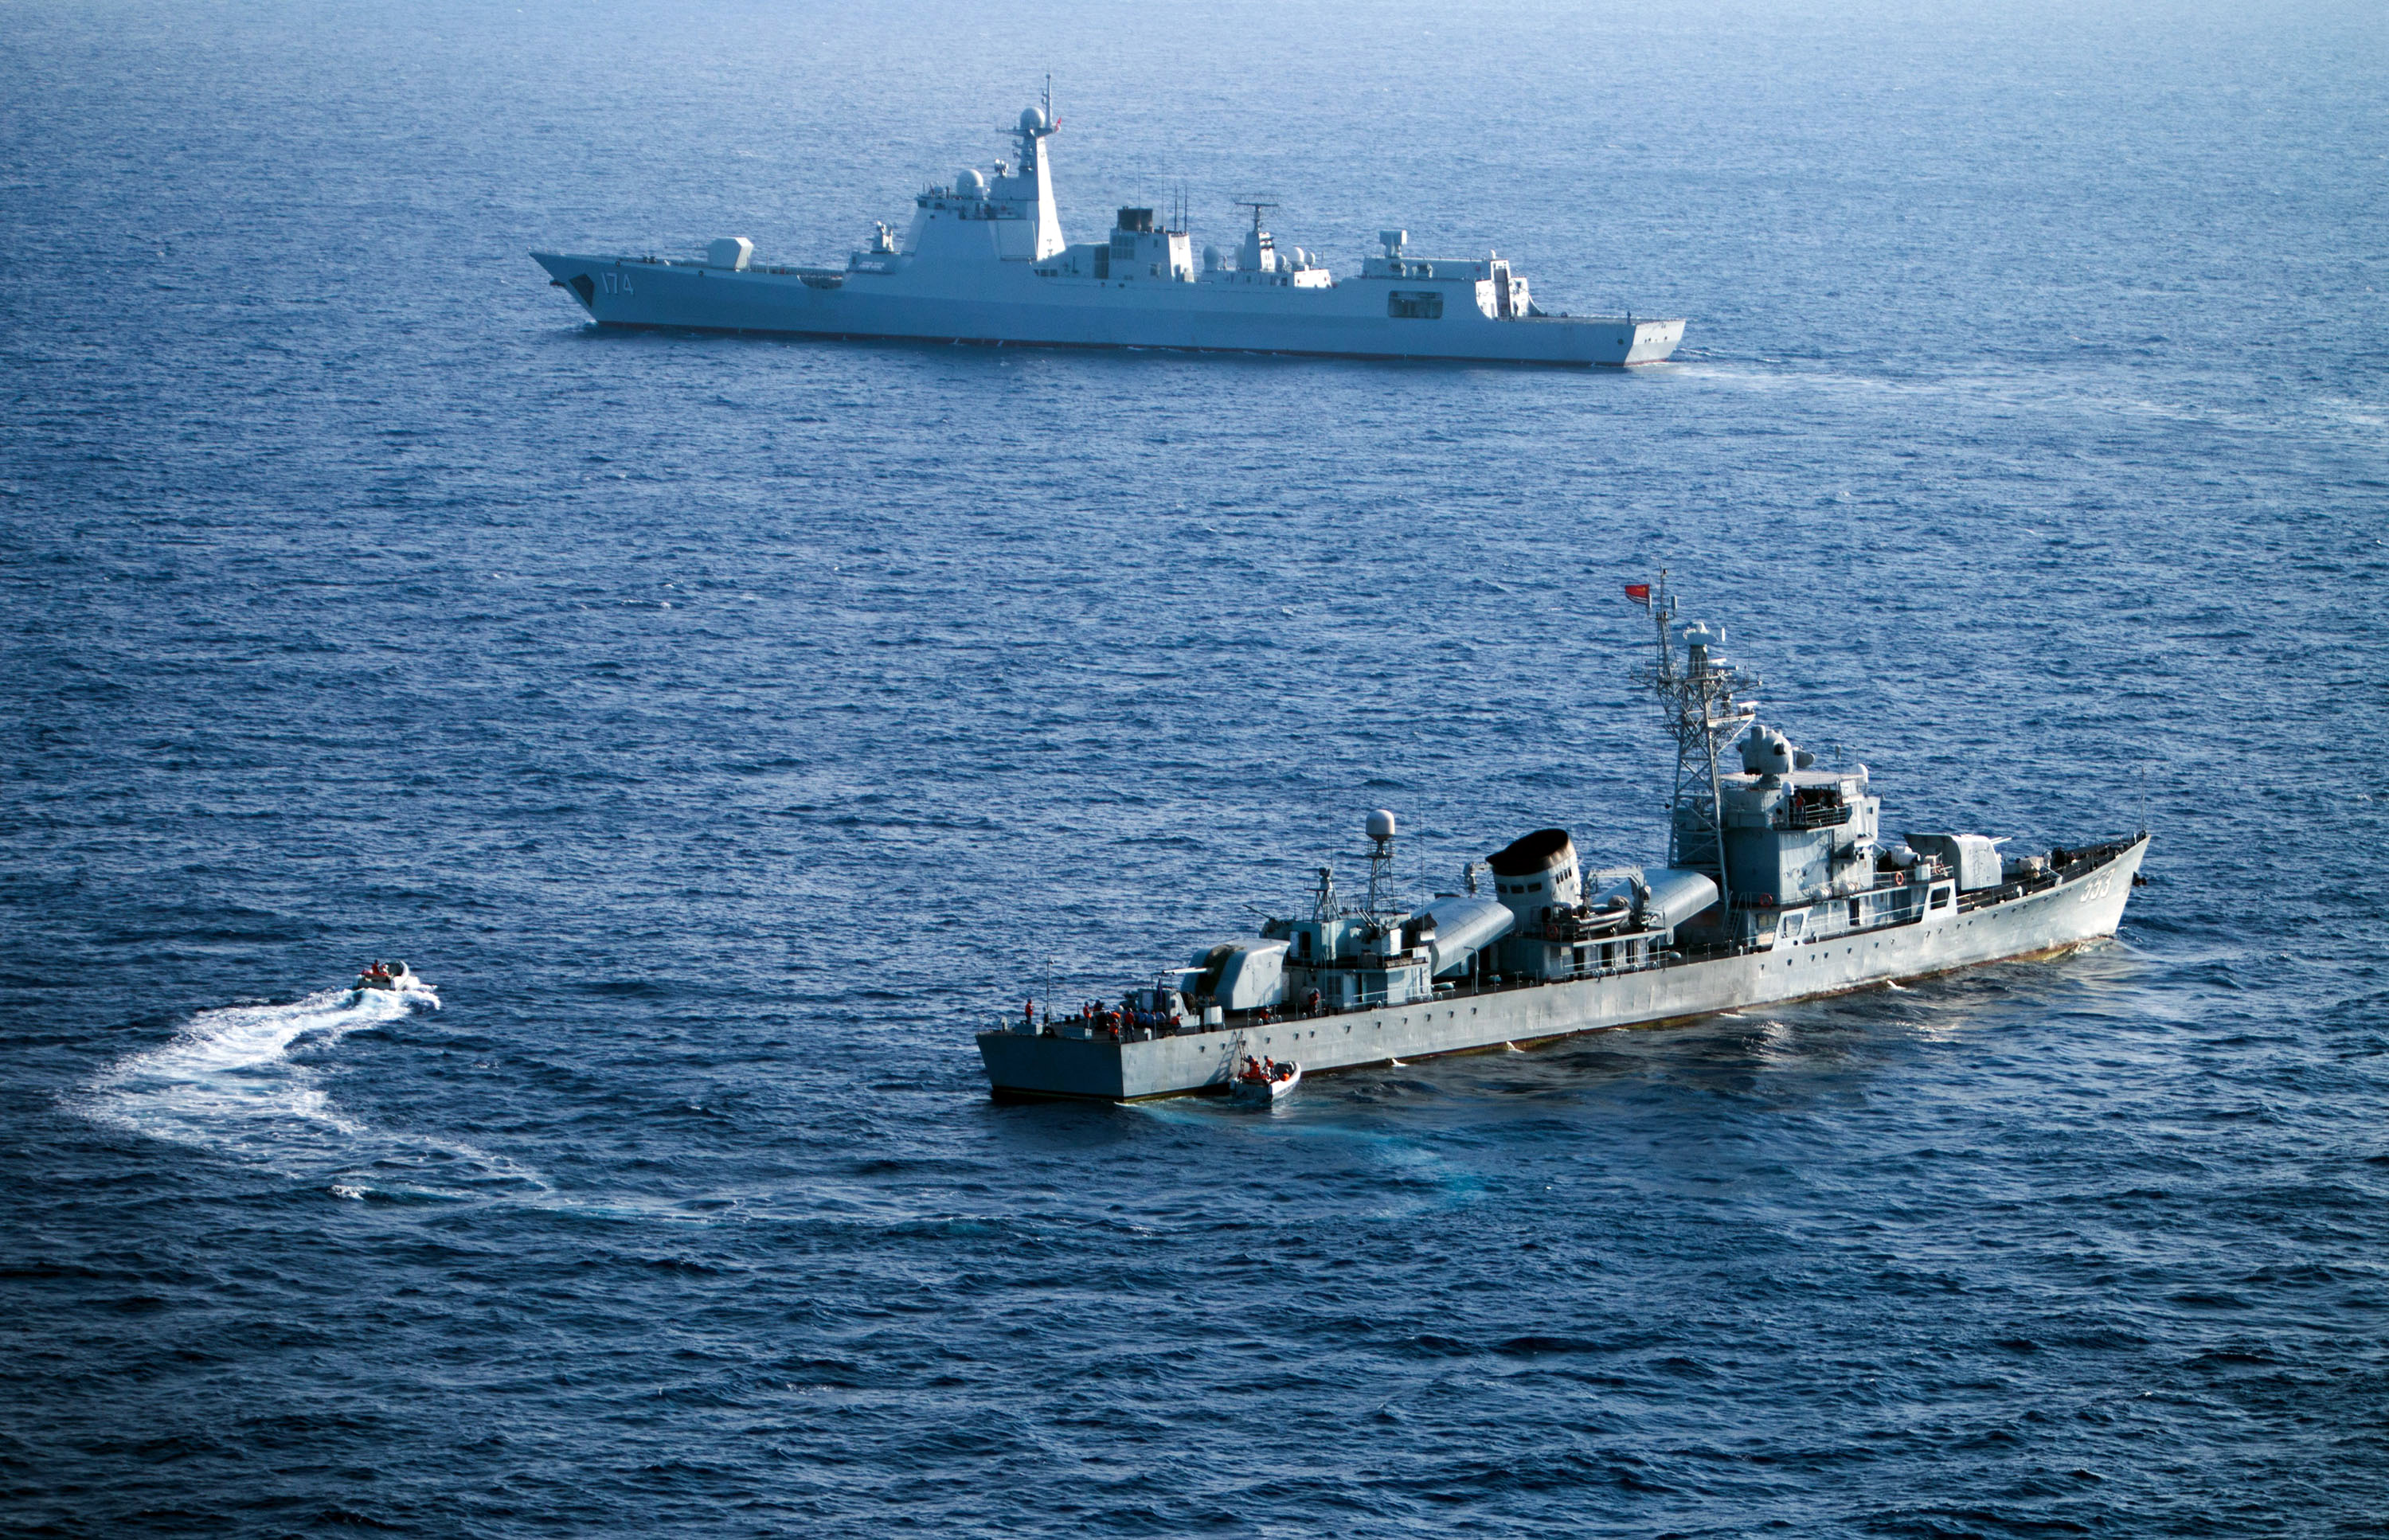 (FILES) This file photo taken on May 5, 2016 shows crew members of China's South Sea Fleet taking part in a drill in the Xisha Islands, or the Paracel Islands in the South China Sea. China and Russia will hold joint naval exercises in the South China Sea in September, Beijing's defence ministry said on July 28, 2016, after an international tribunal invalidated the Asian giant's extensive claims in the area. / AFP PHOTO / STR